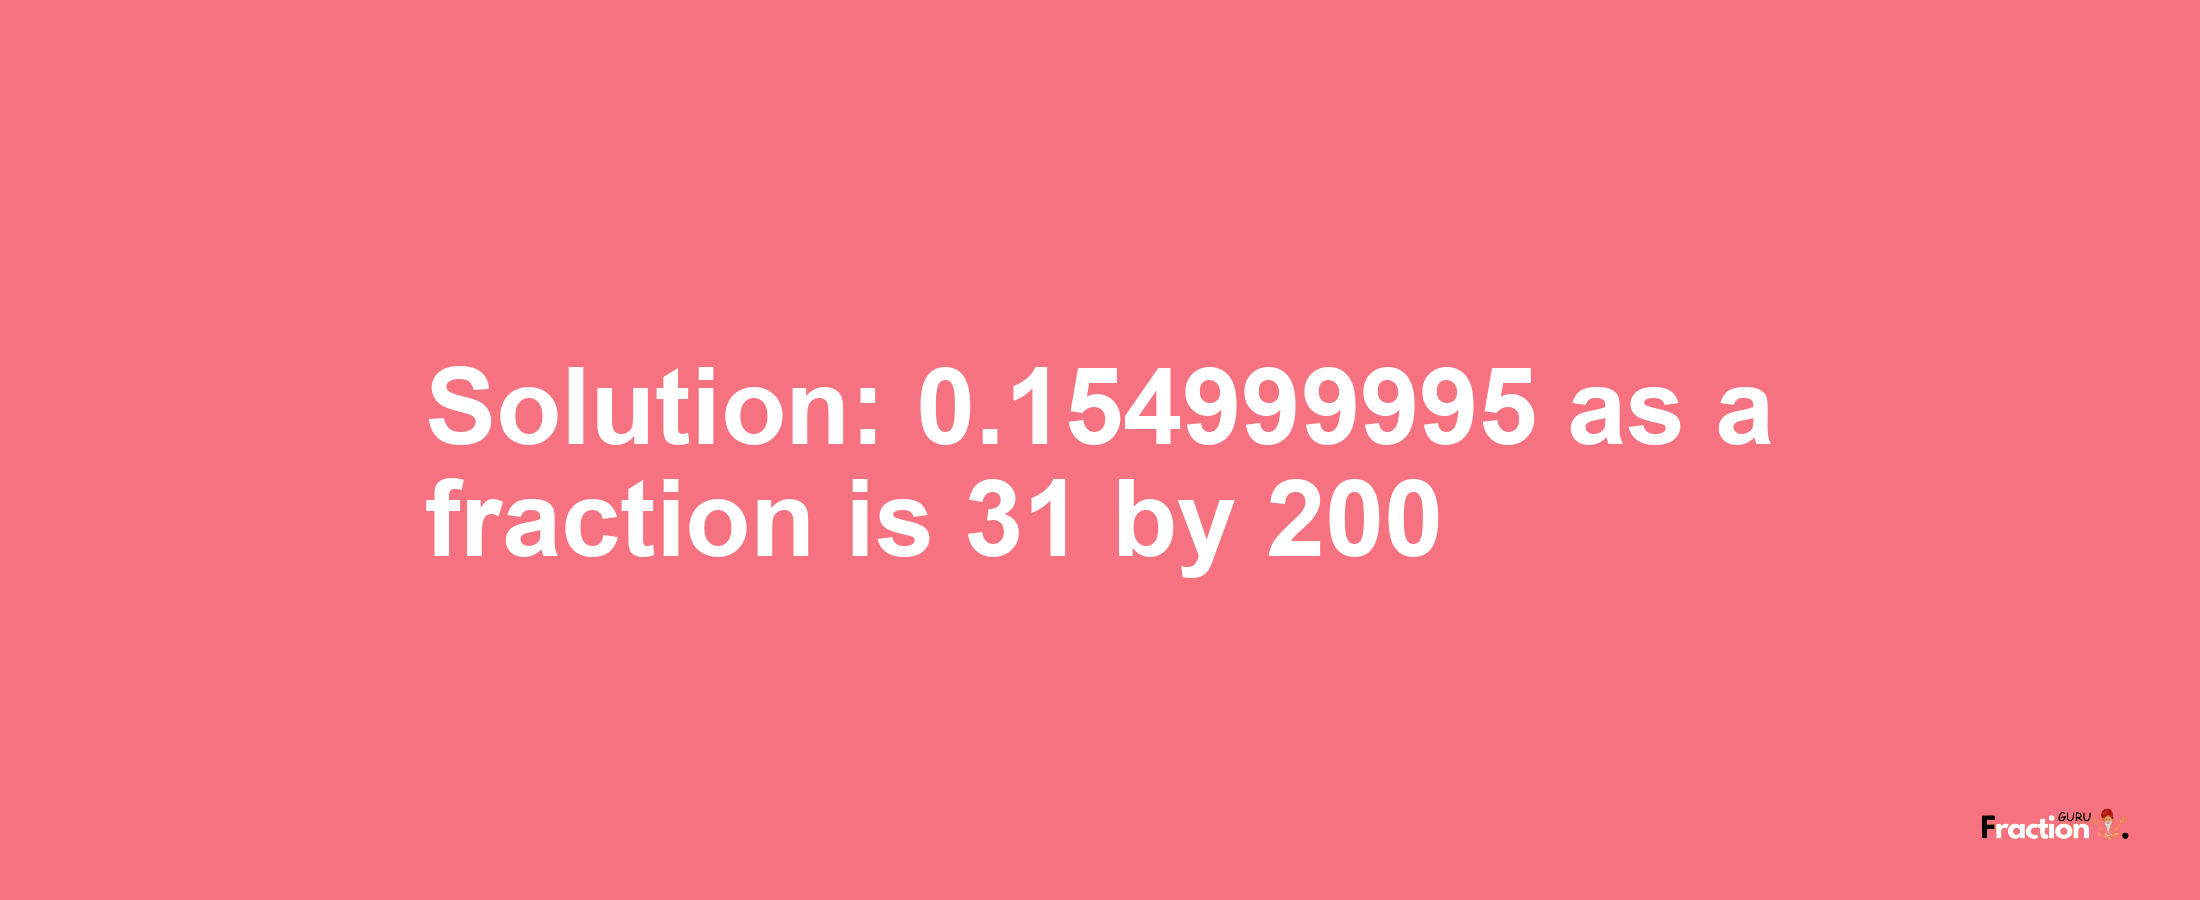 Solution:0.154999995 as a fraction is 31/200